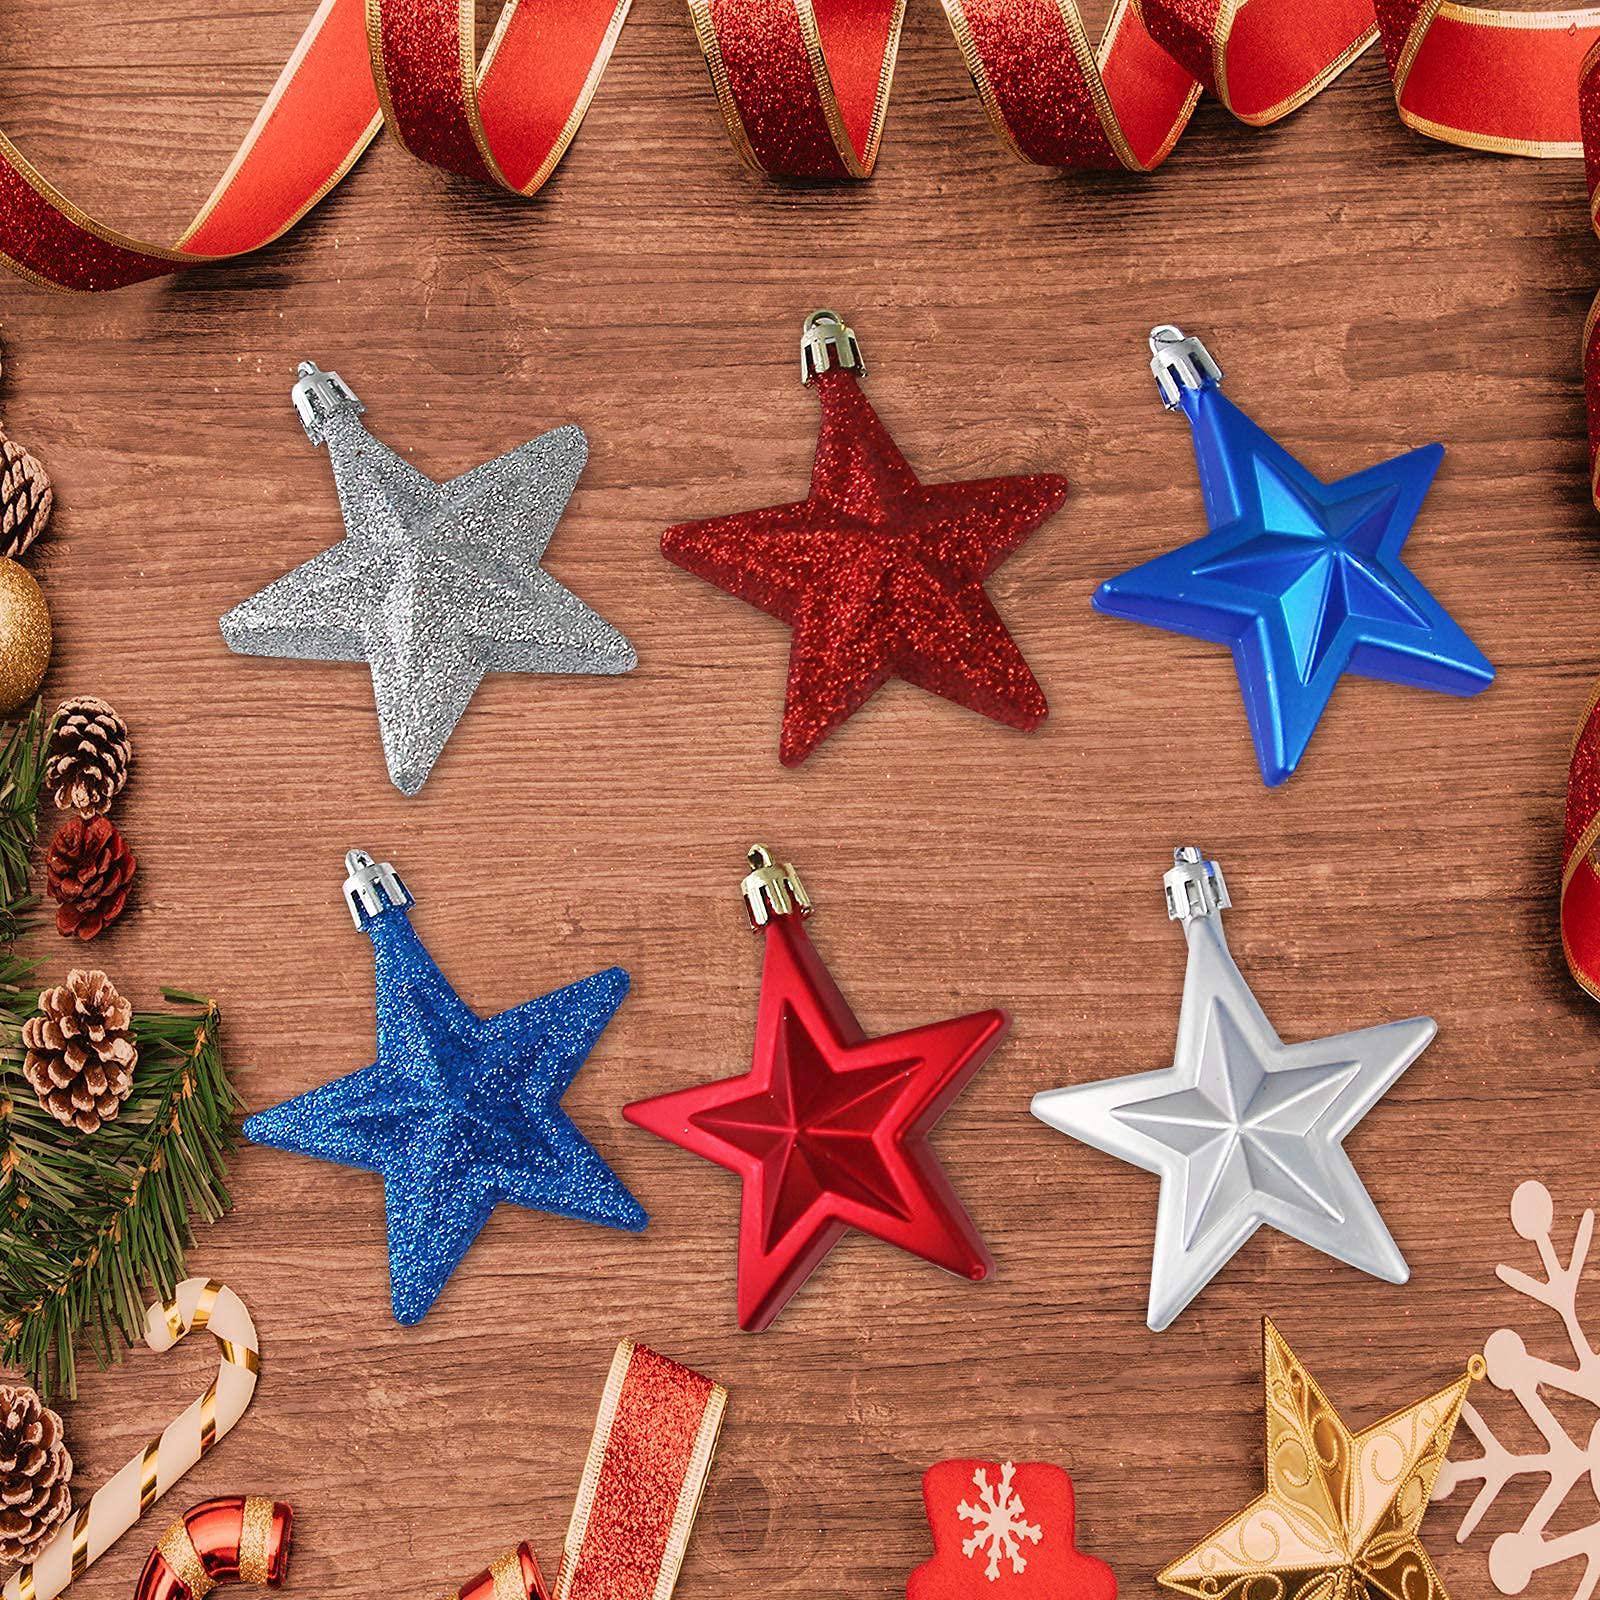 bouticol 24 pieces hanging star ornaments christmas new year labor day independence day hanging ornament for home party indoor outdoor